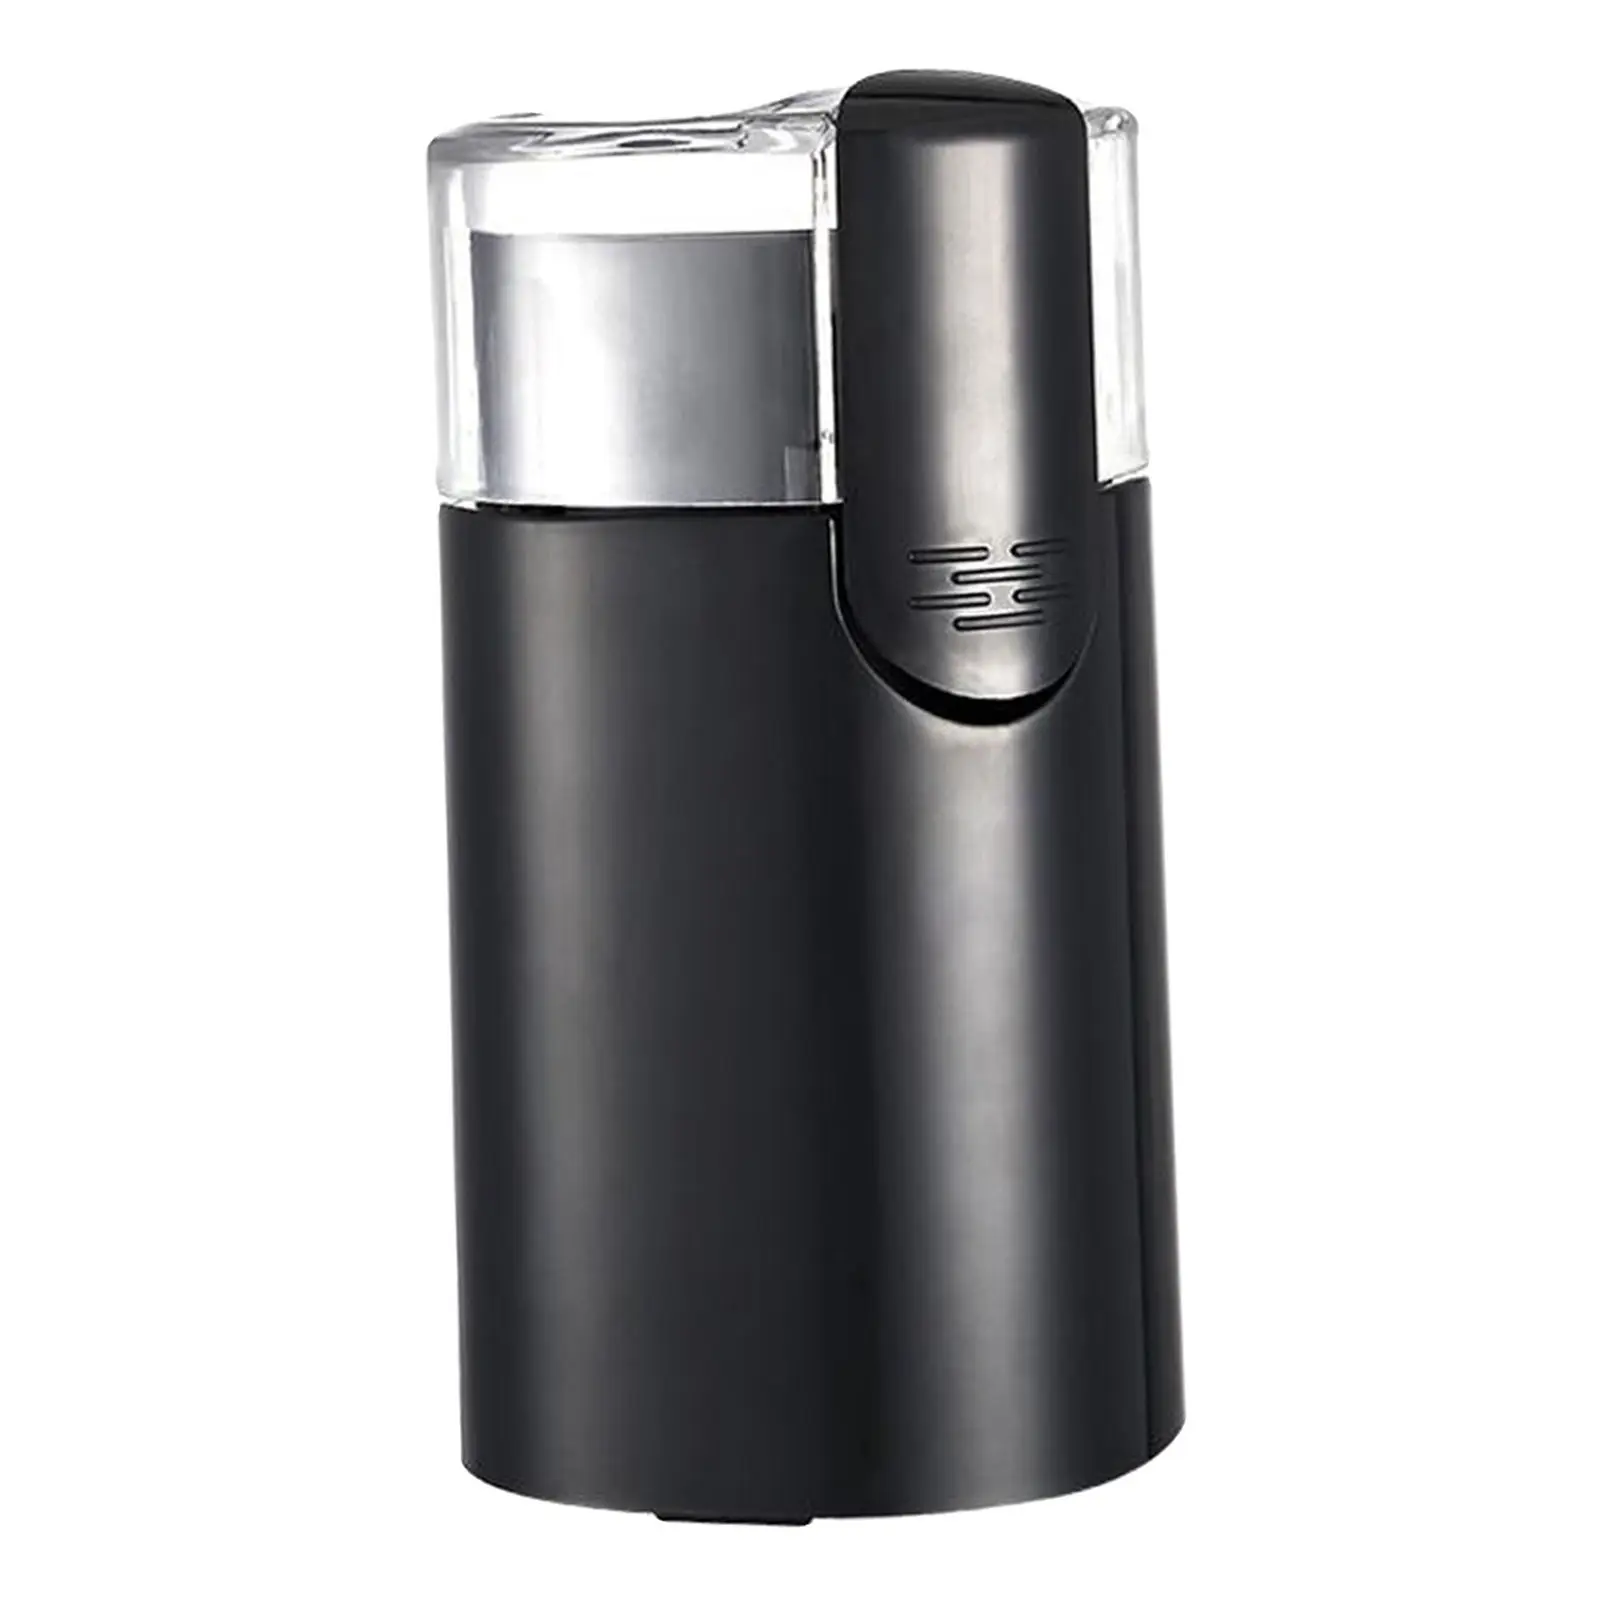 Portable Coffee Grinder Removable Design Stainless Steel Blade Mini Easy On/Off Nut Grain Grinder Grain Mills for Herbs Peanut